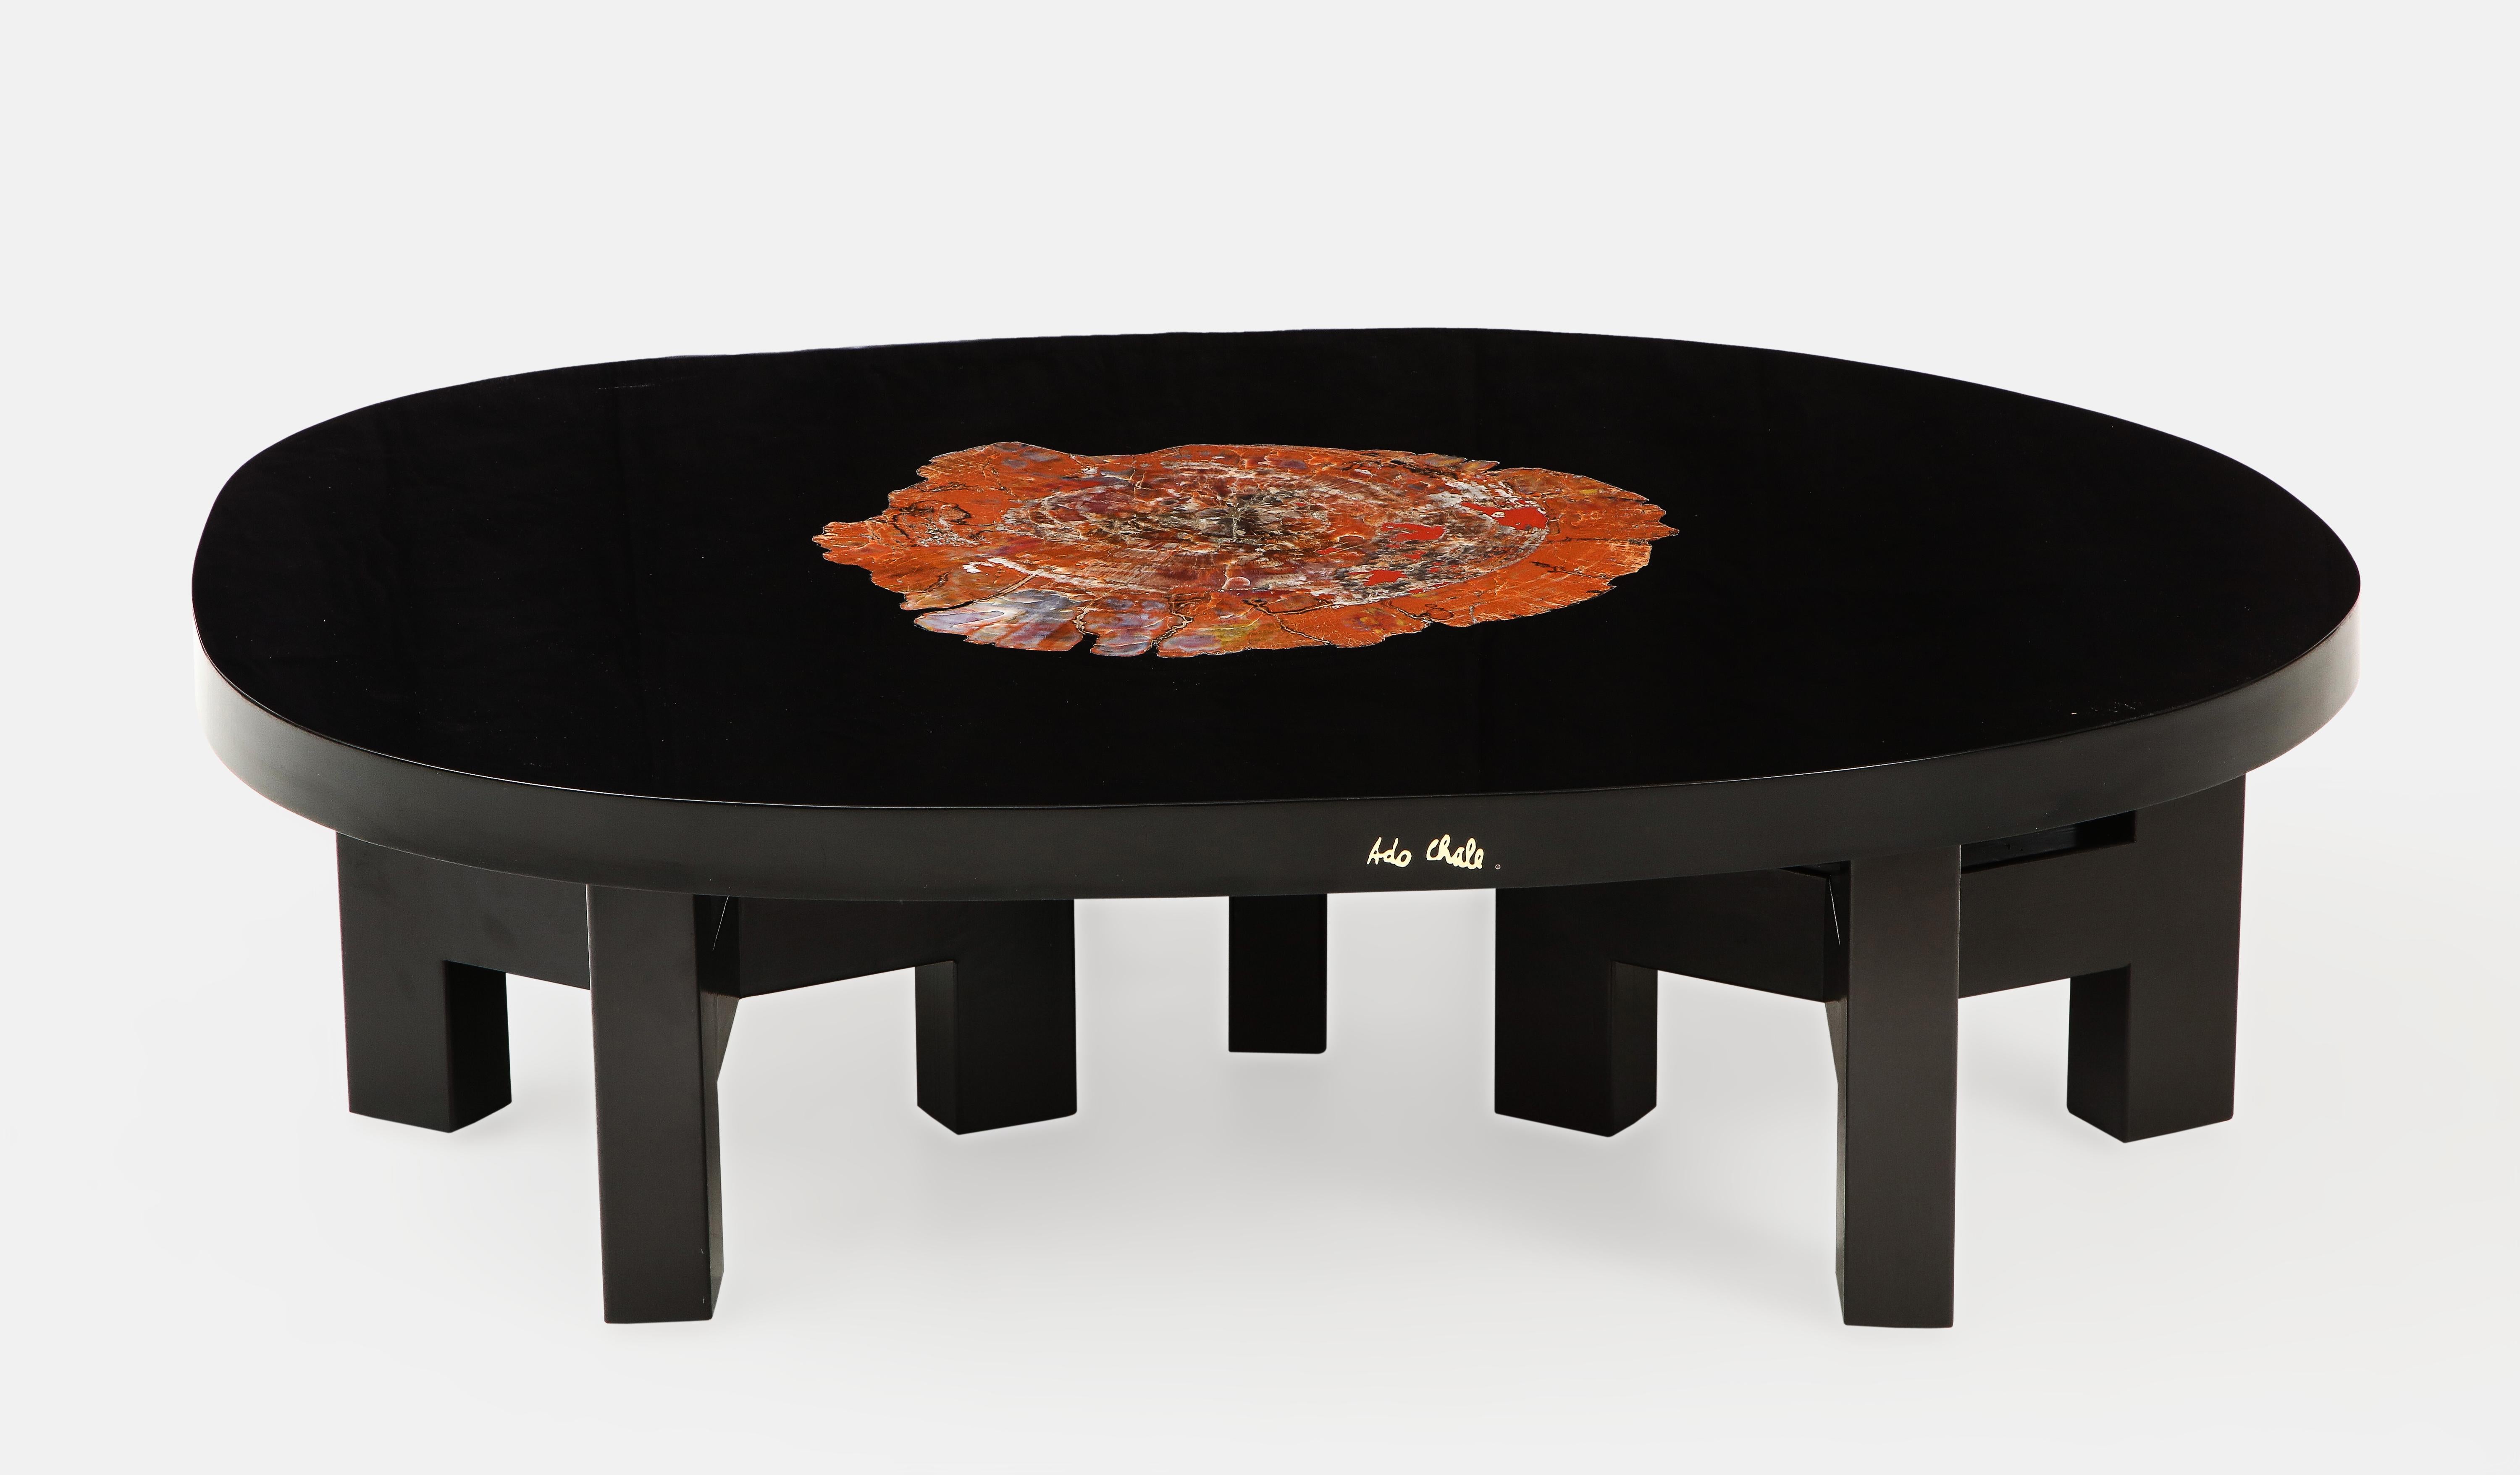 Ado Chale rare coffee table with Arizona petrified Sequoia wood inlaid in thick black lacquered resin tabletop resting on 3 sets of black painted tripod steel brackets, Belgium, 1970s. The Sequoia fossilized wood dating back 250 million years with